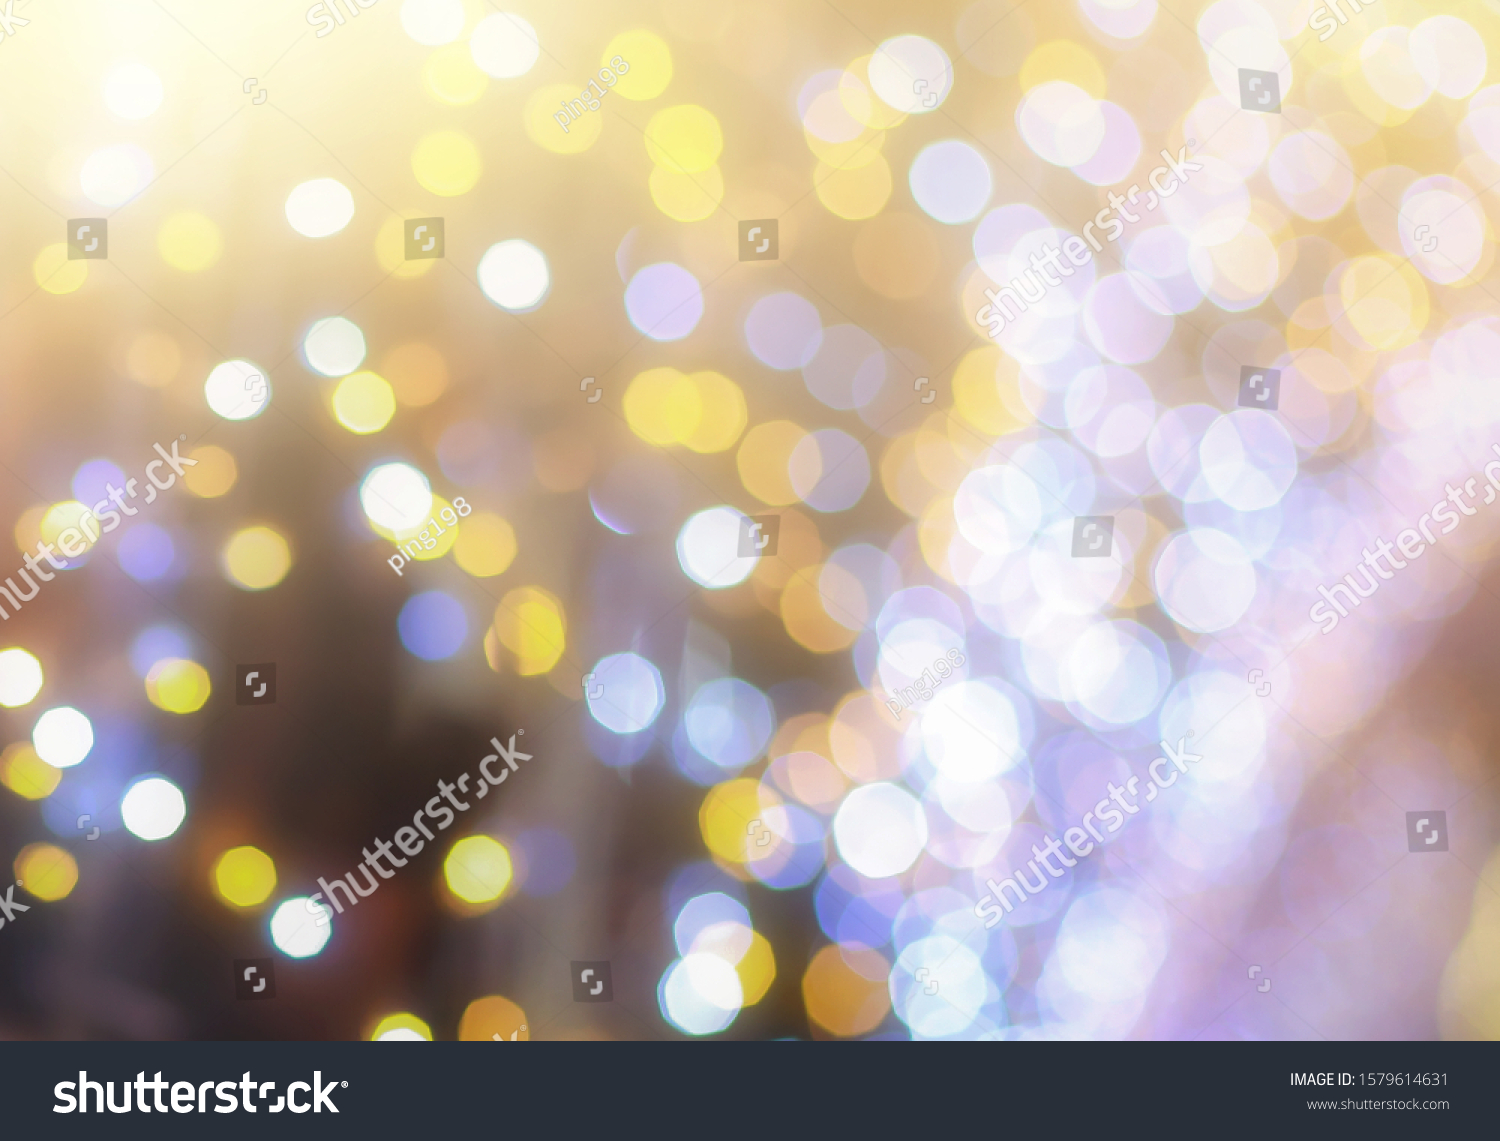 Blurred backdrop, blurred background, circle blur, bokeh blur from the light shining through as a backdrop and beautiful computer screen images. #1579614631